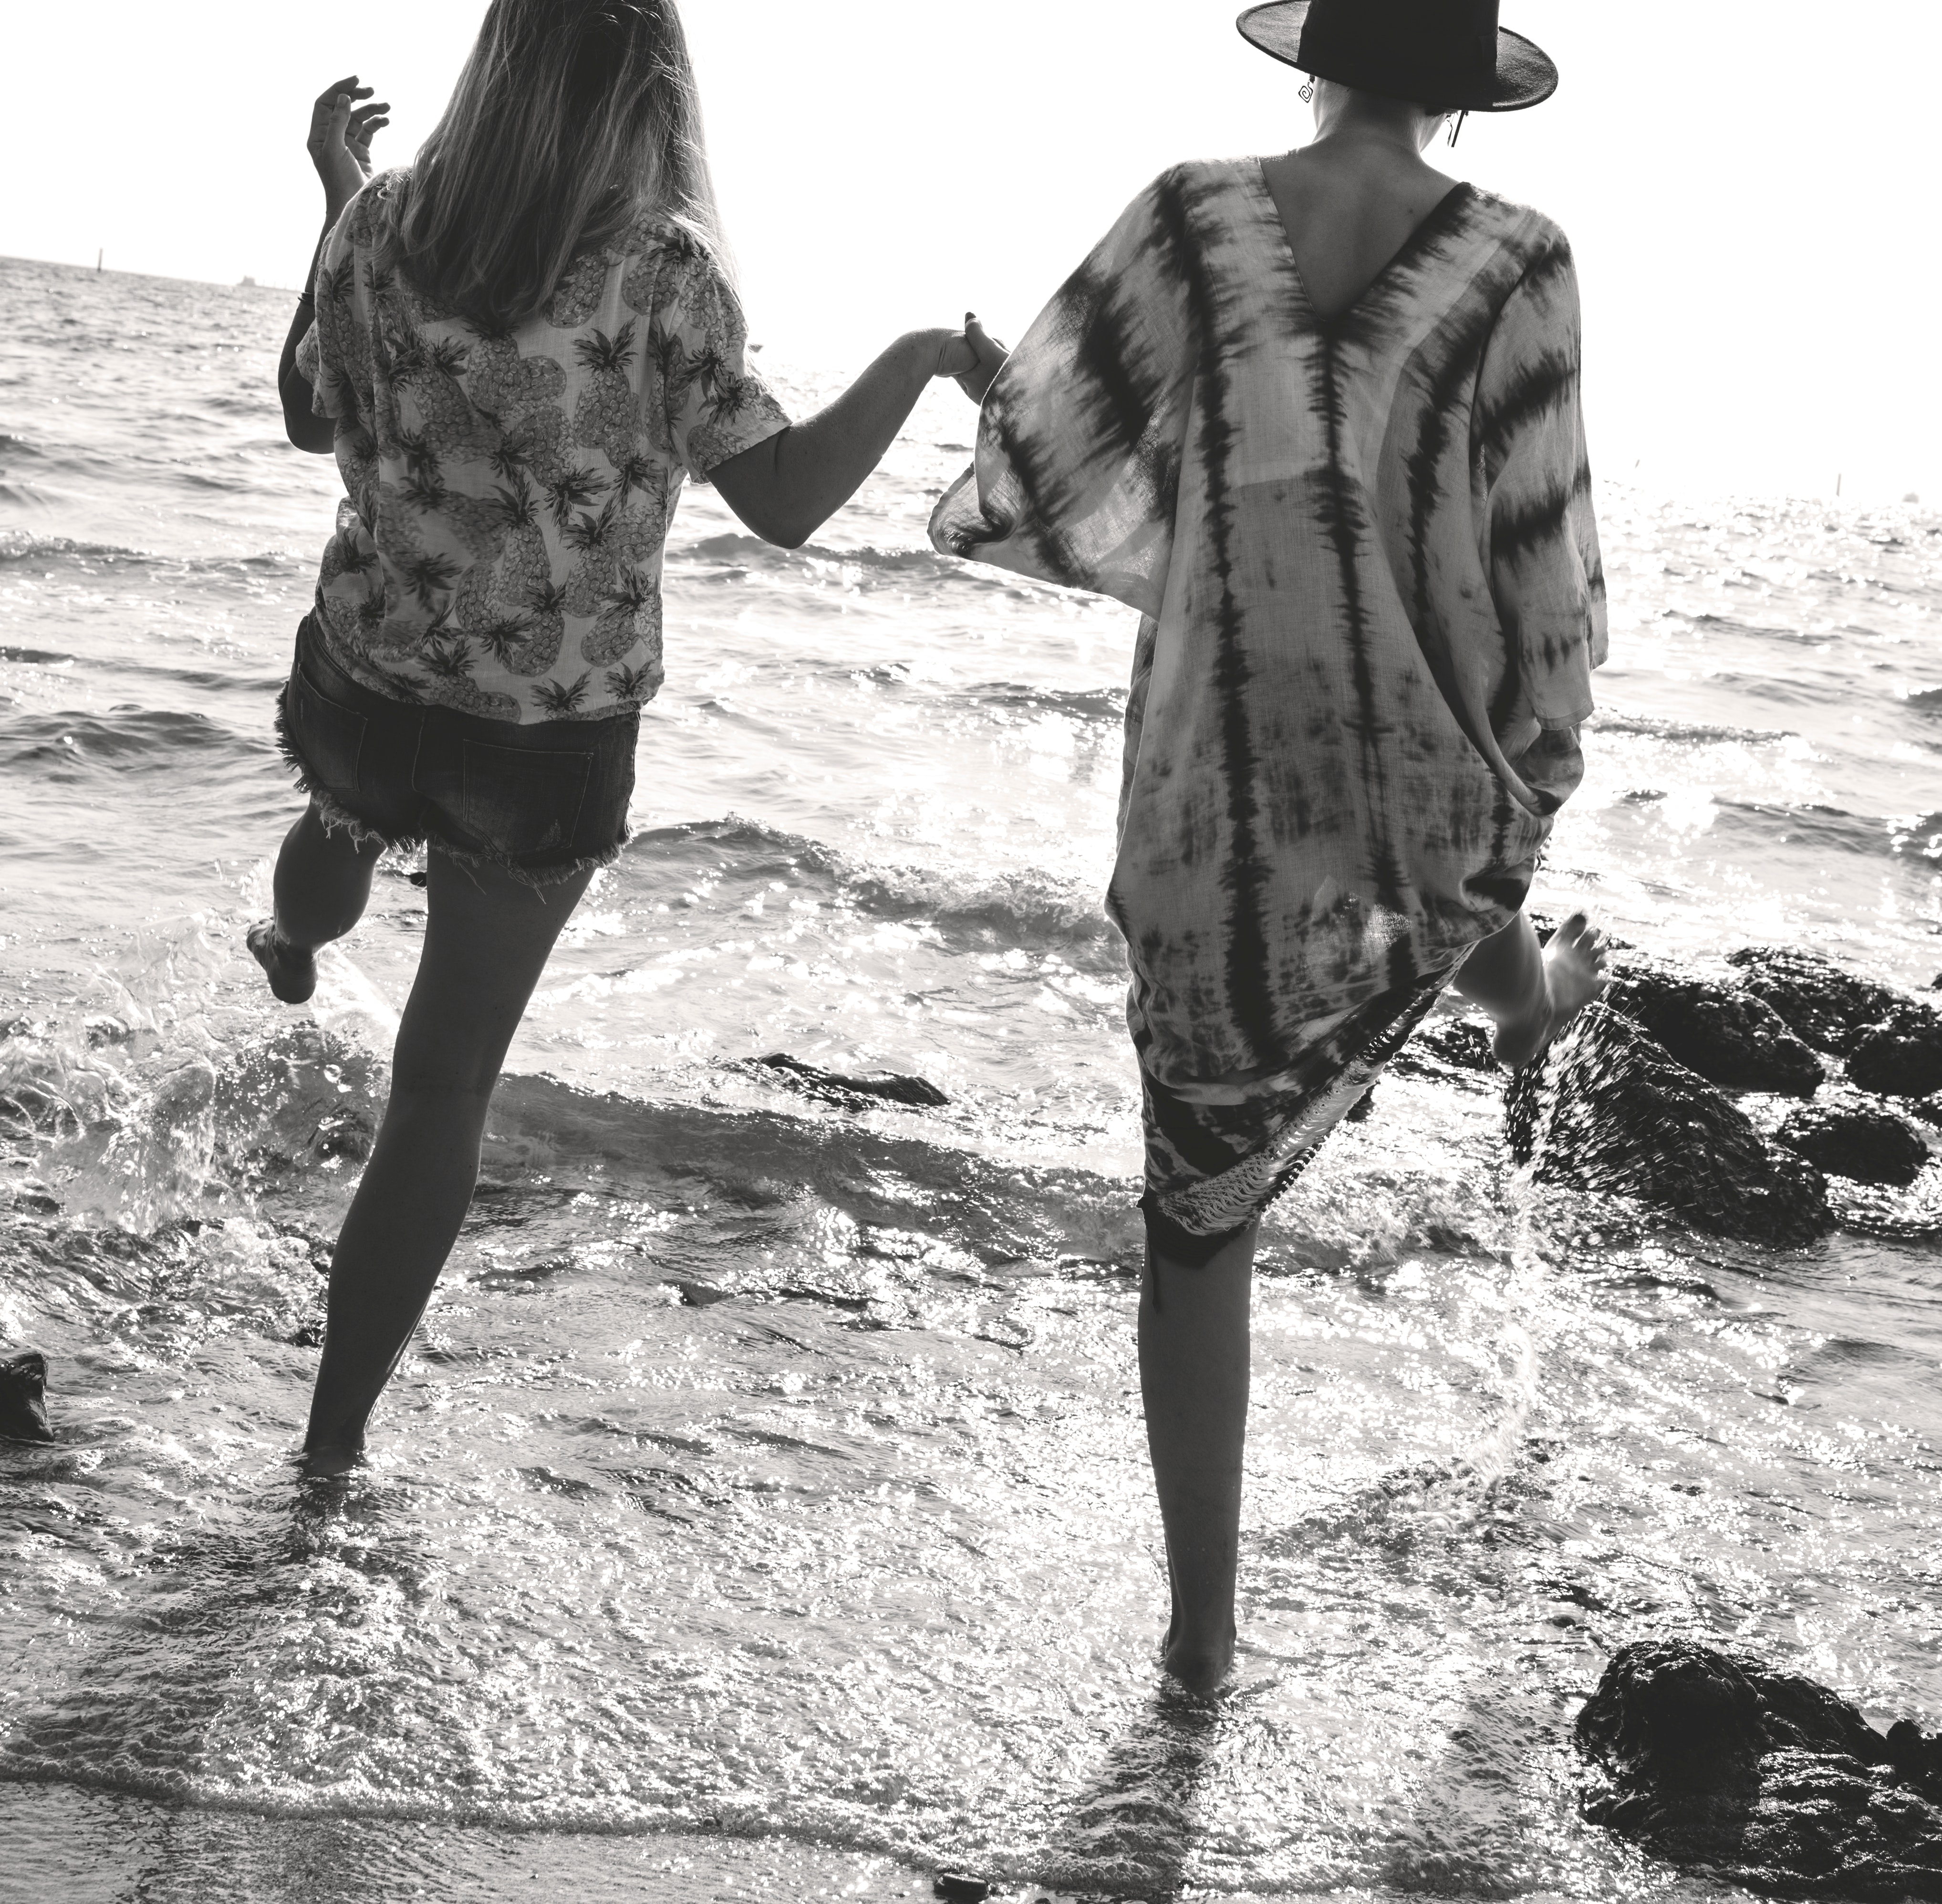 Grayscale photograph of 2 women holding hands while walking on sea shore